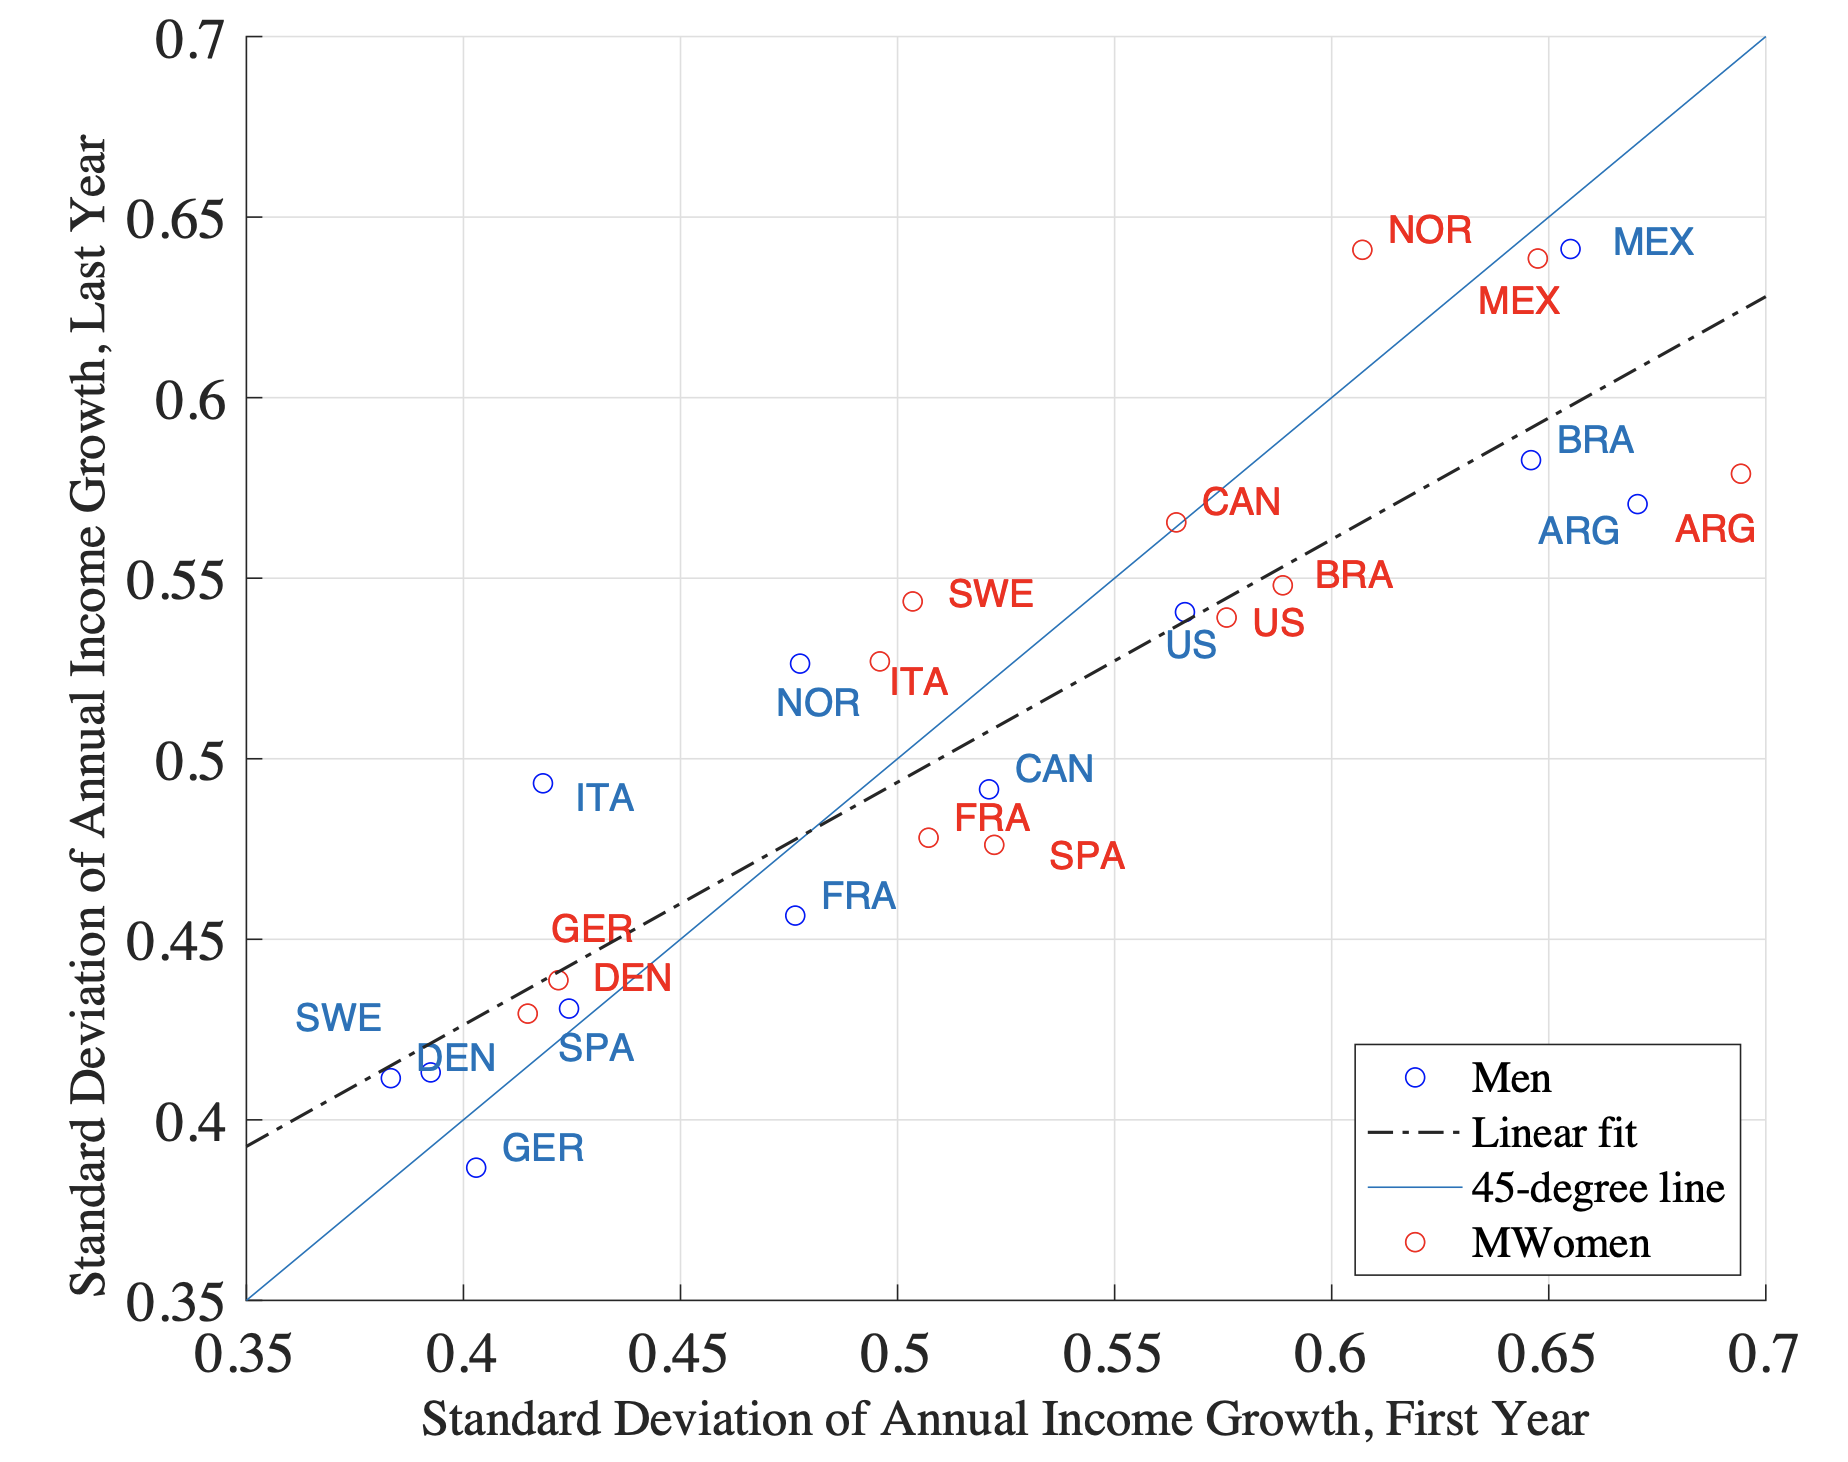 Figure 2 Comparing the volatility of annual income growth in the first versus last year of sample for GRID countries